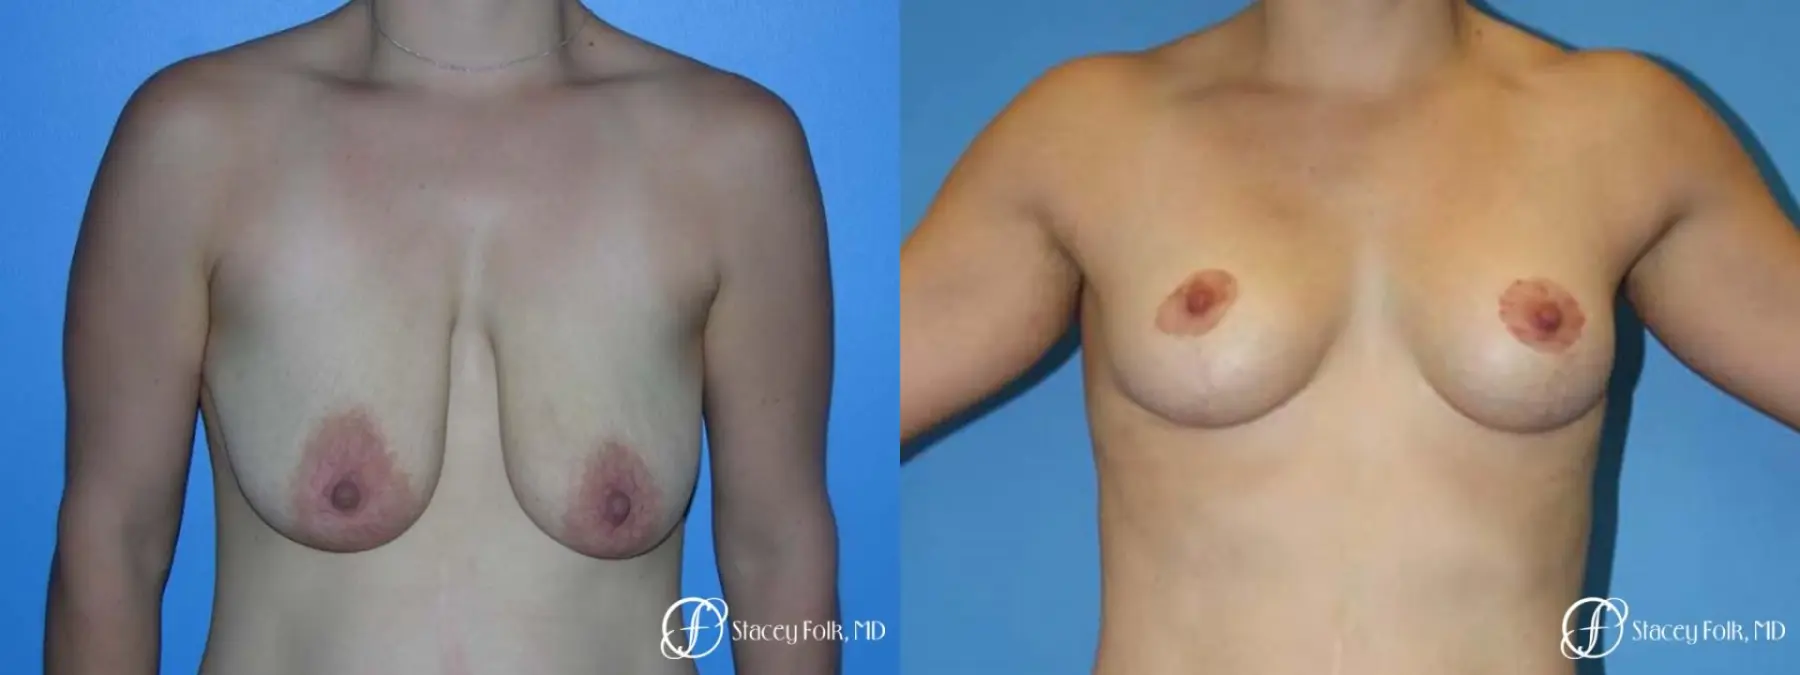 Denver Breast Lift - Mastopexy 7981 - Before and After